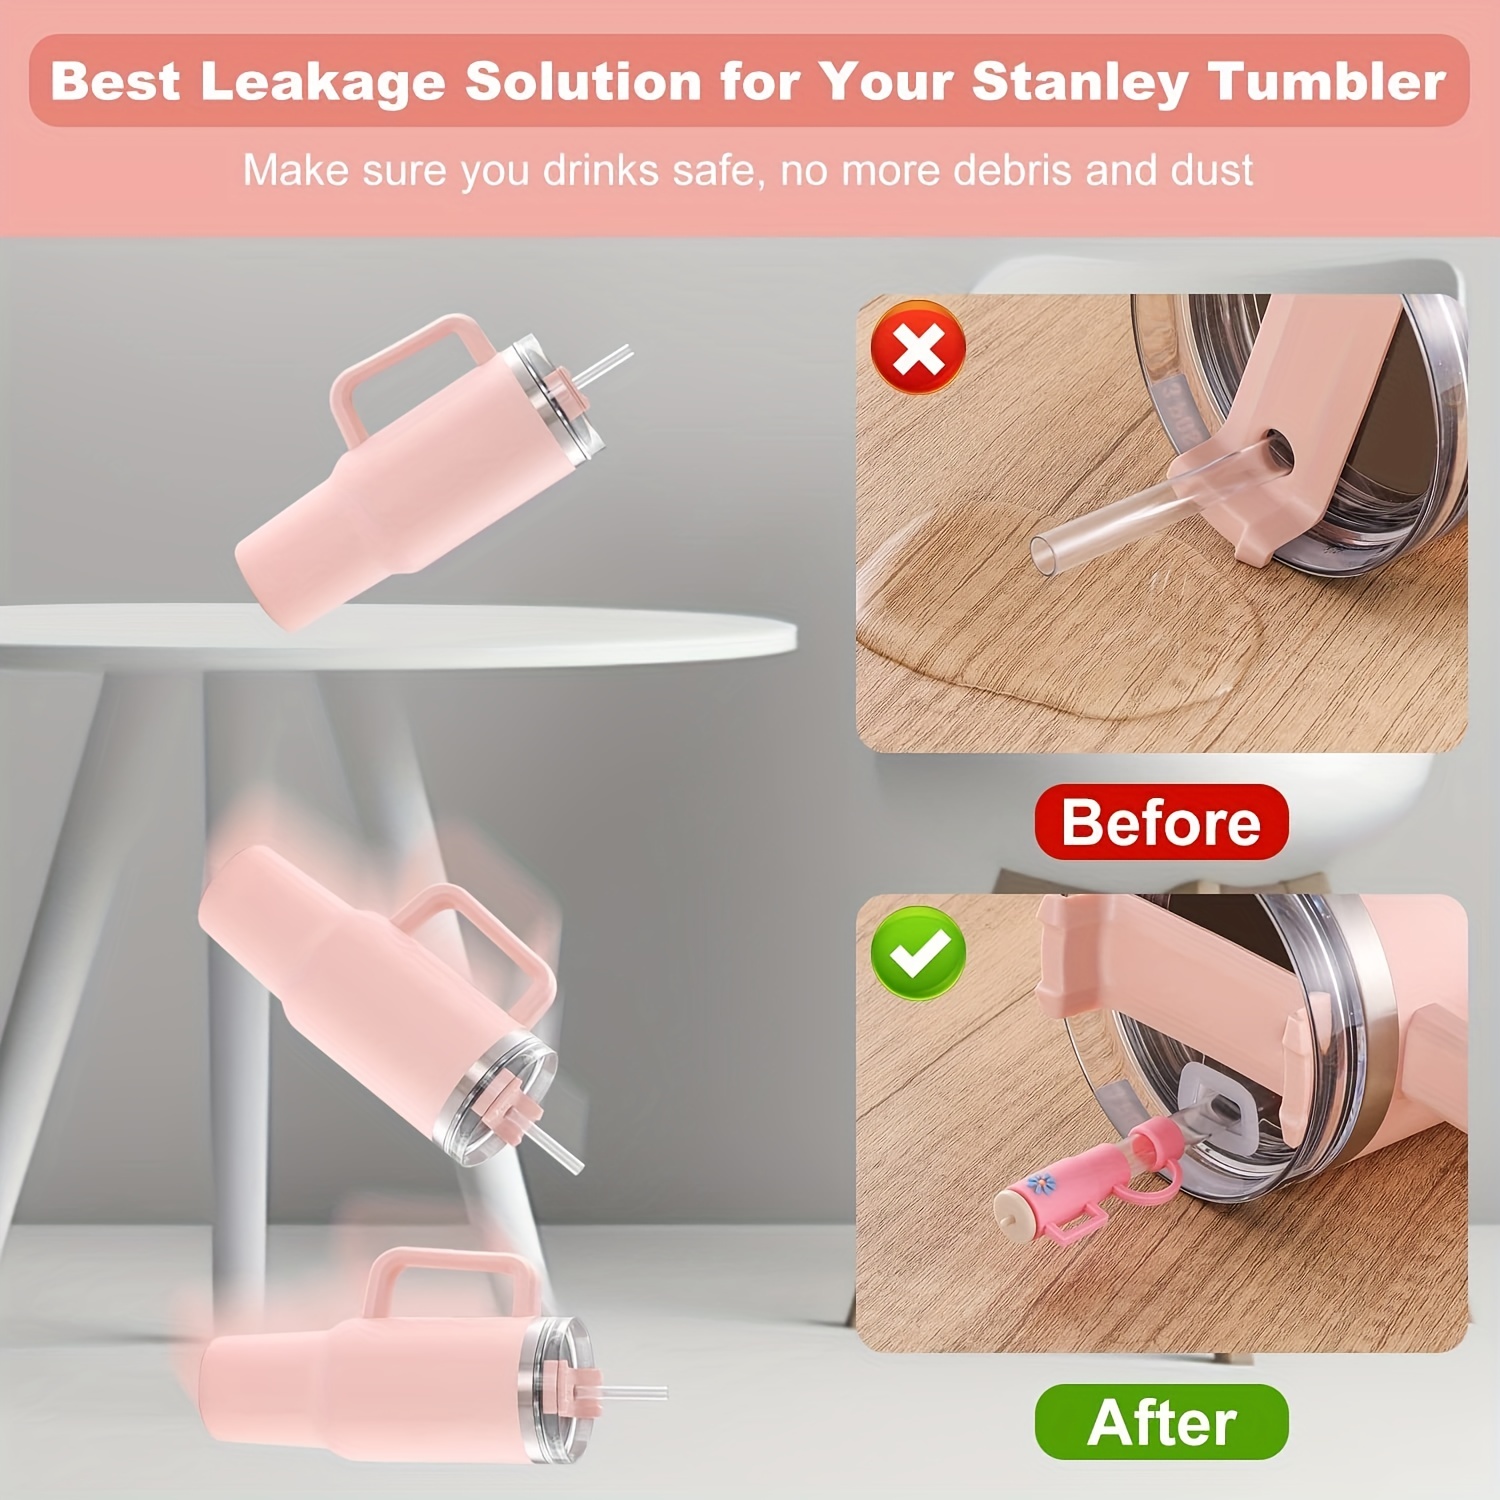 Our easy to use Stanley spill stopper allows you to not worry